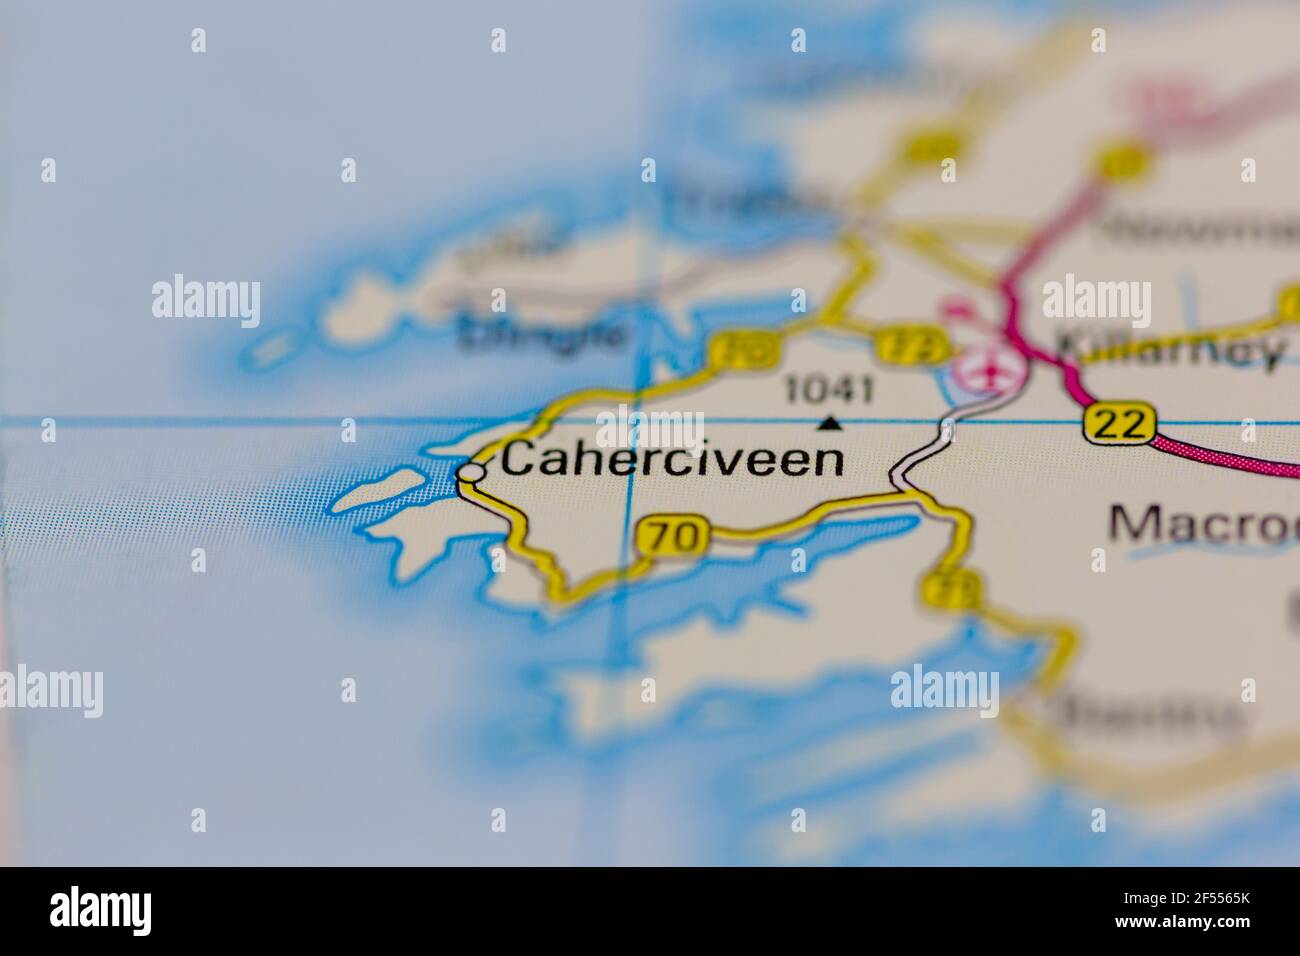 Caherciveen Shown on a Geography map or road map Stock Photo